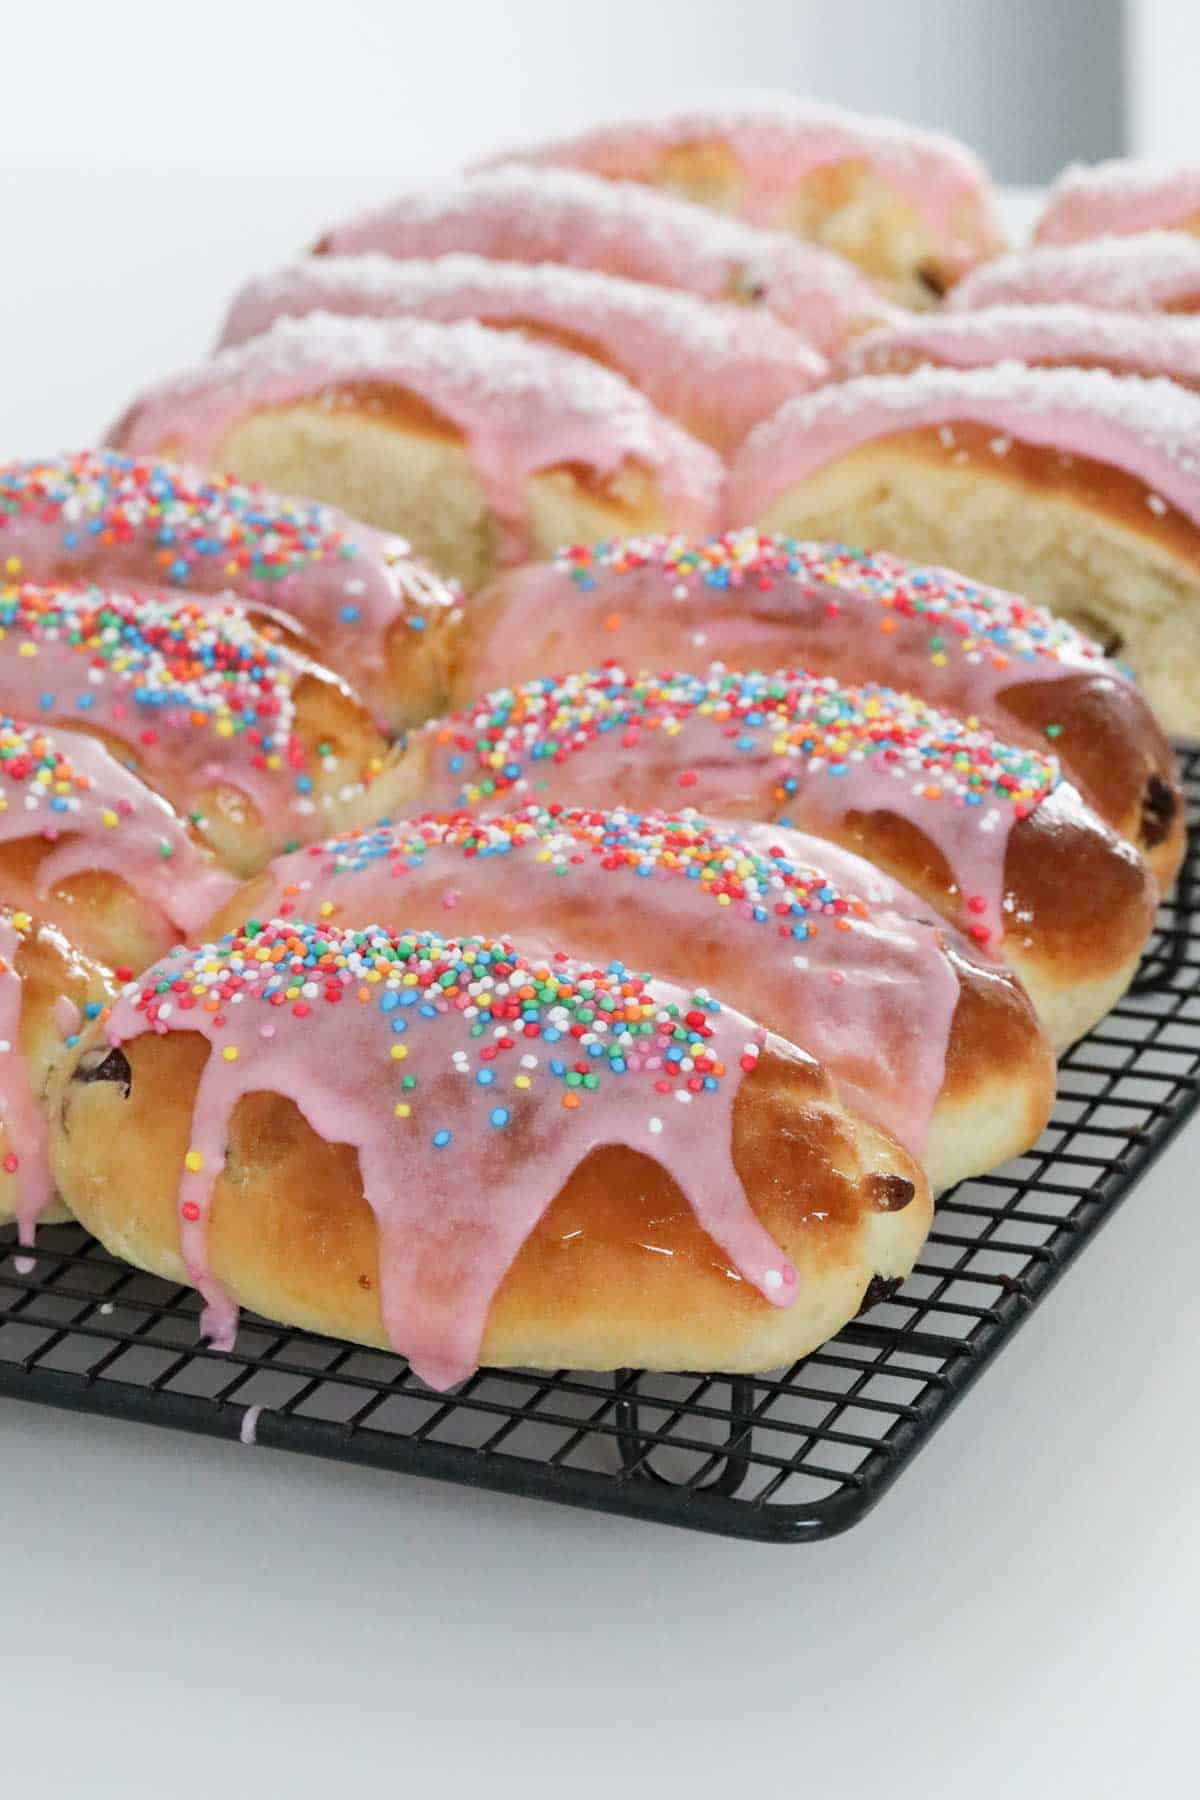 baked finger buns on a cooling rack iced with pink icing and some sprinkled with coconut, others sprinkled with 100s and 1000s.